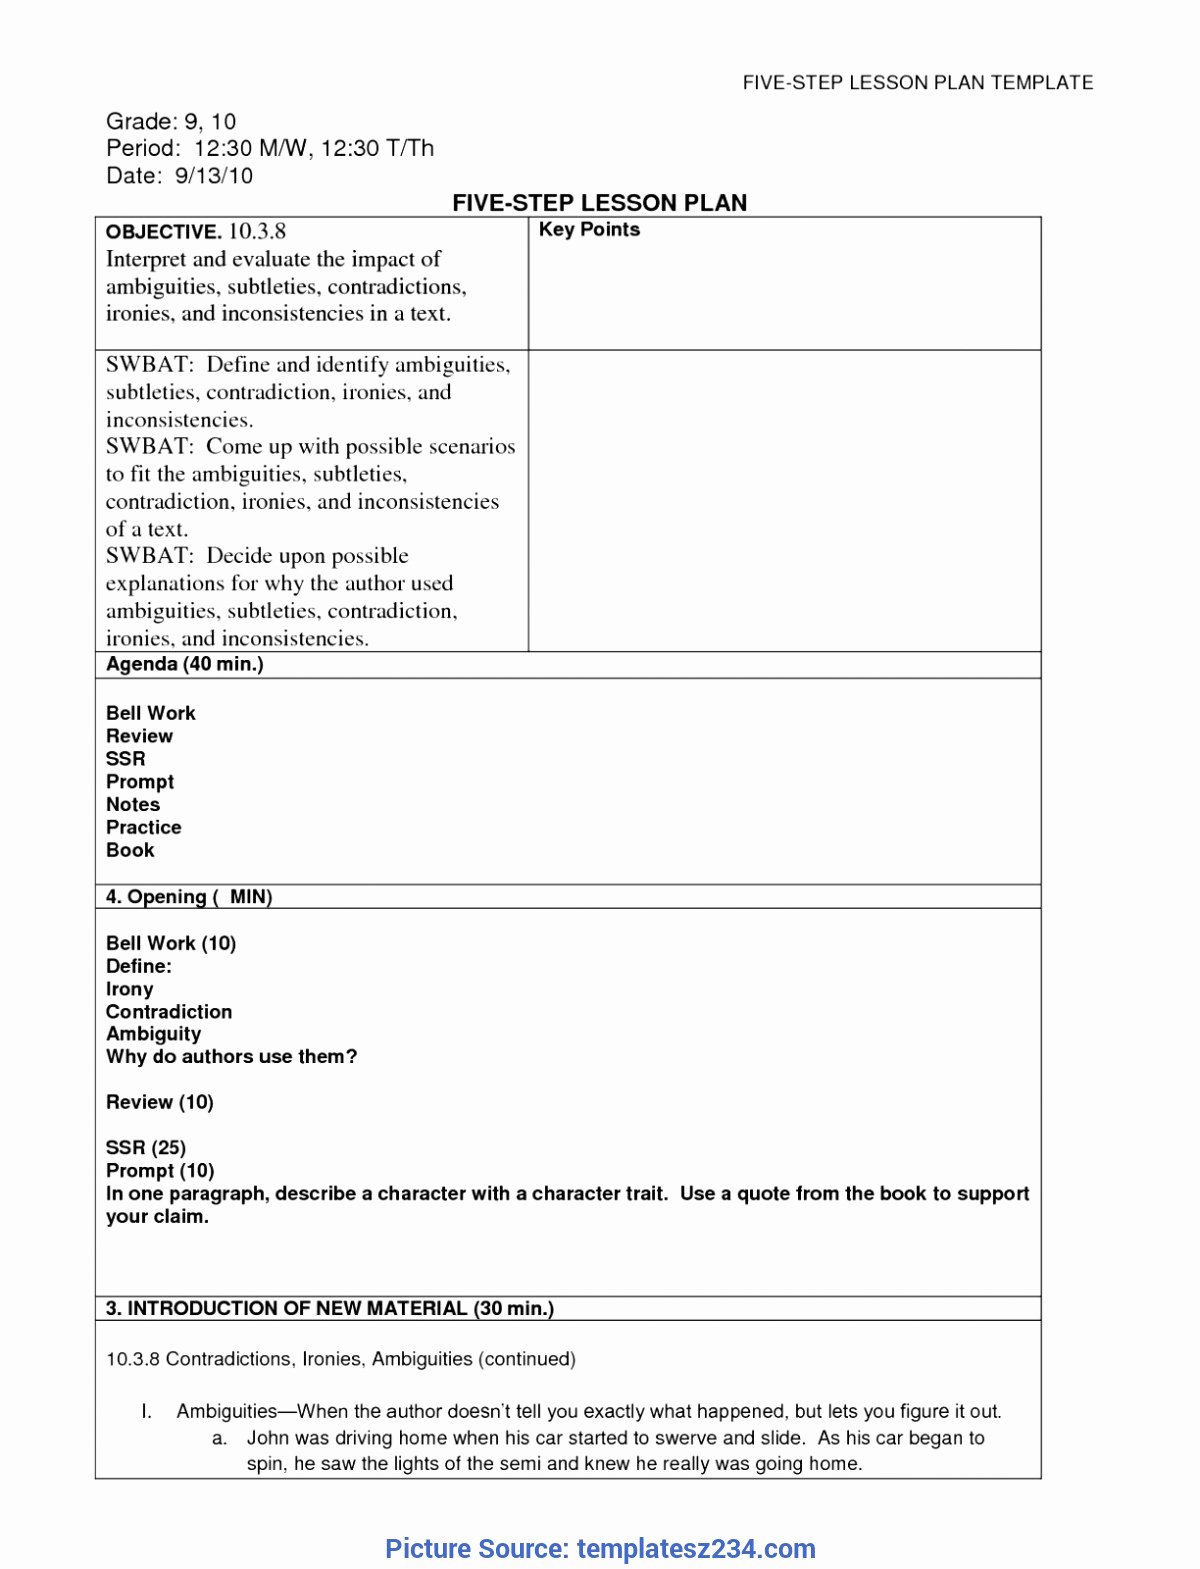 Siop Lesson Plan Template 2 Luxury Siop Lesson Plan Template 2 Doc Paperwork